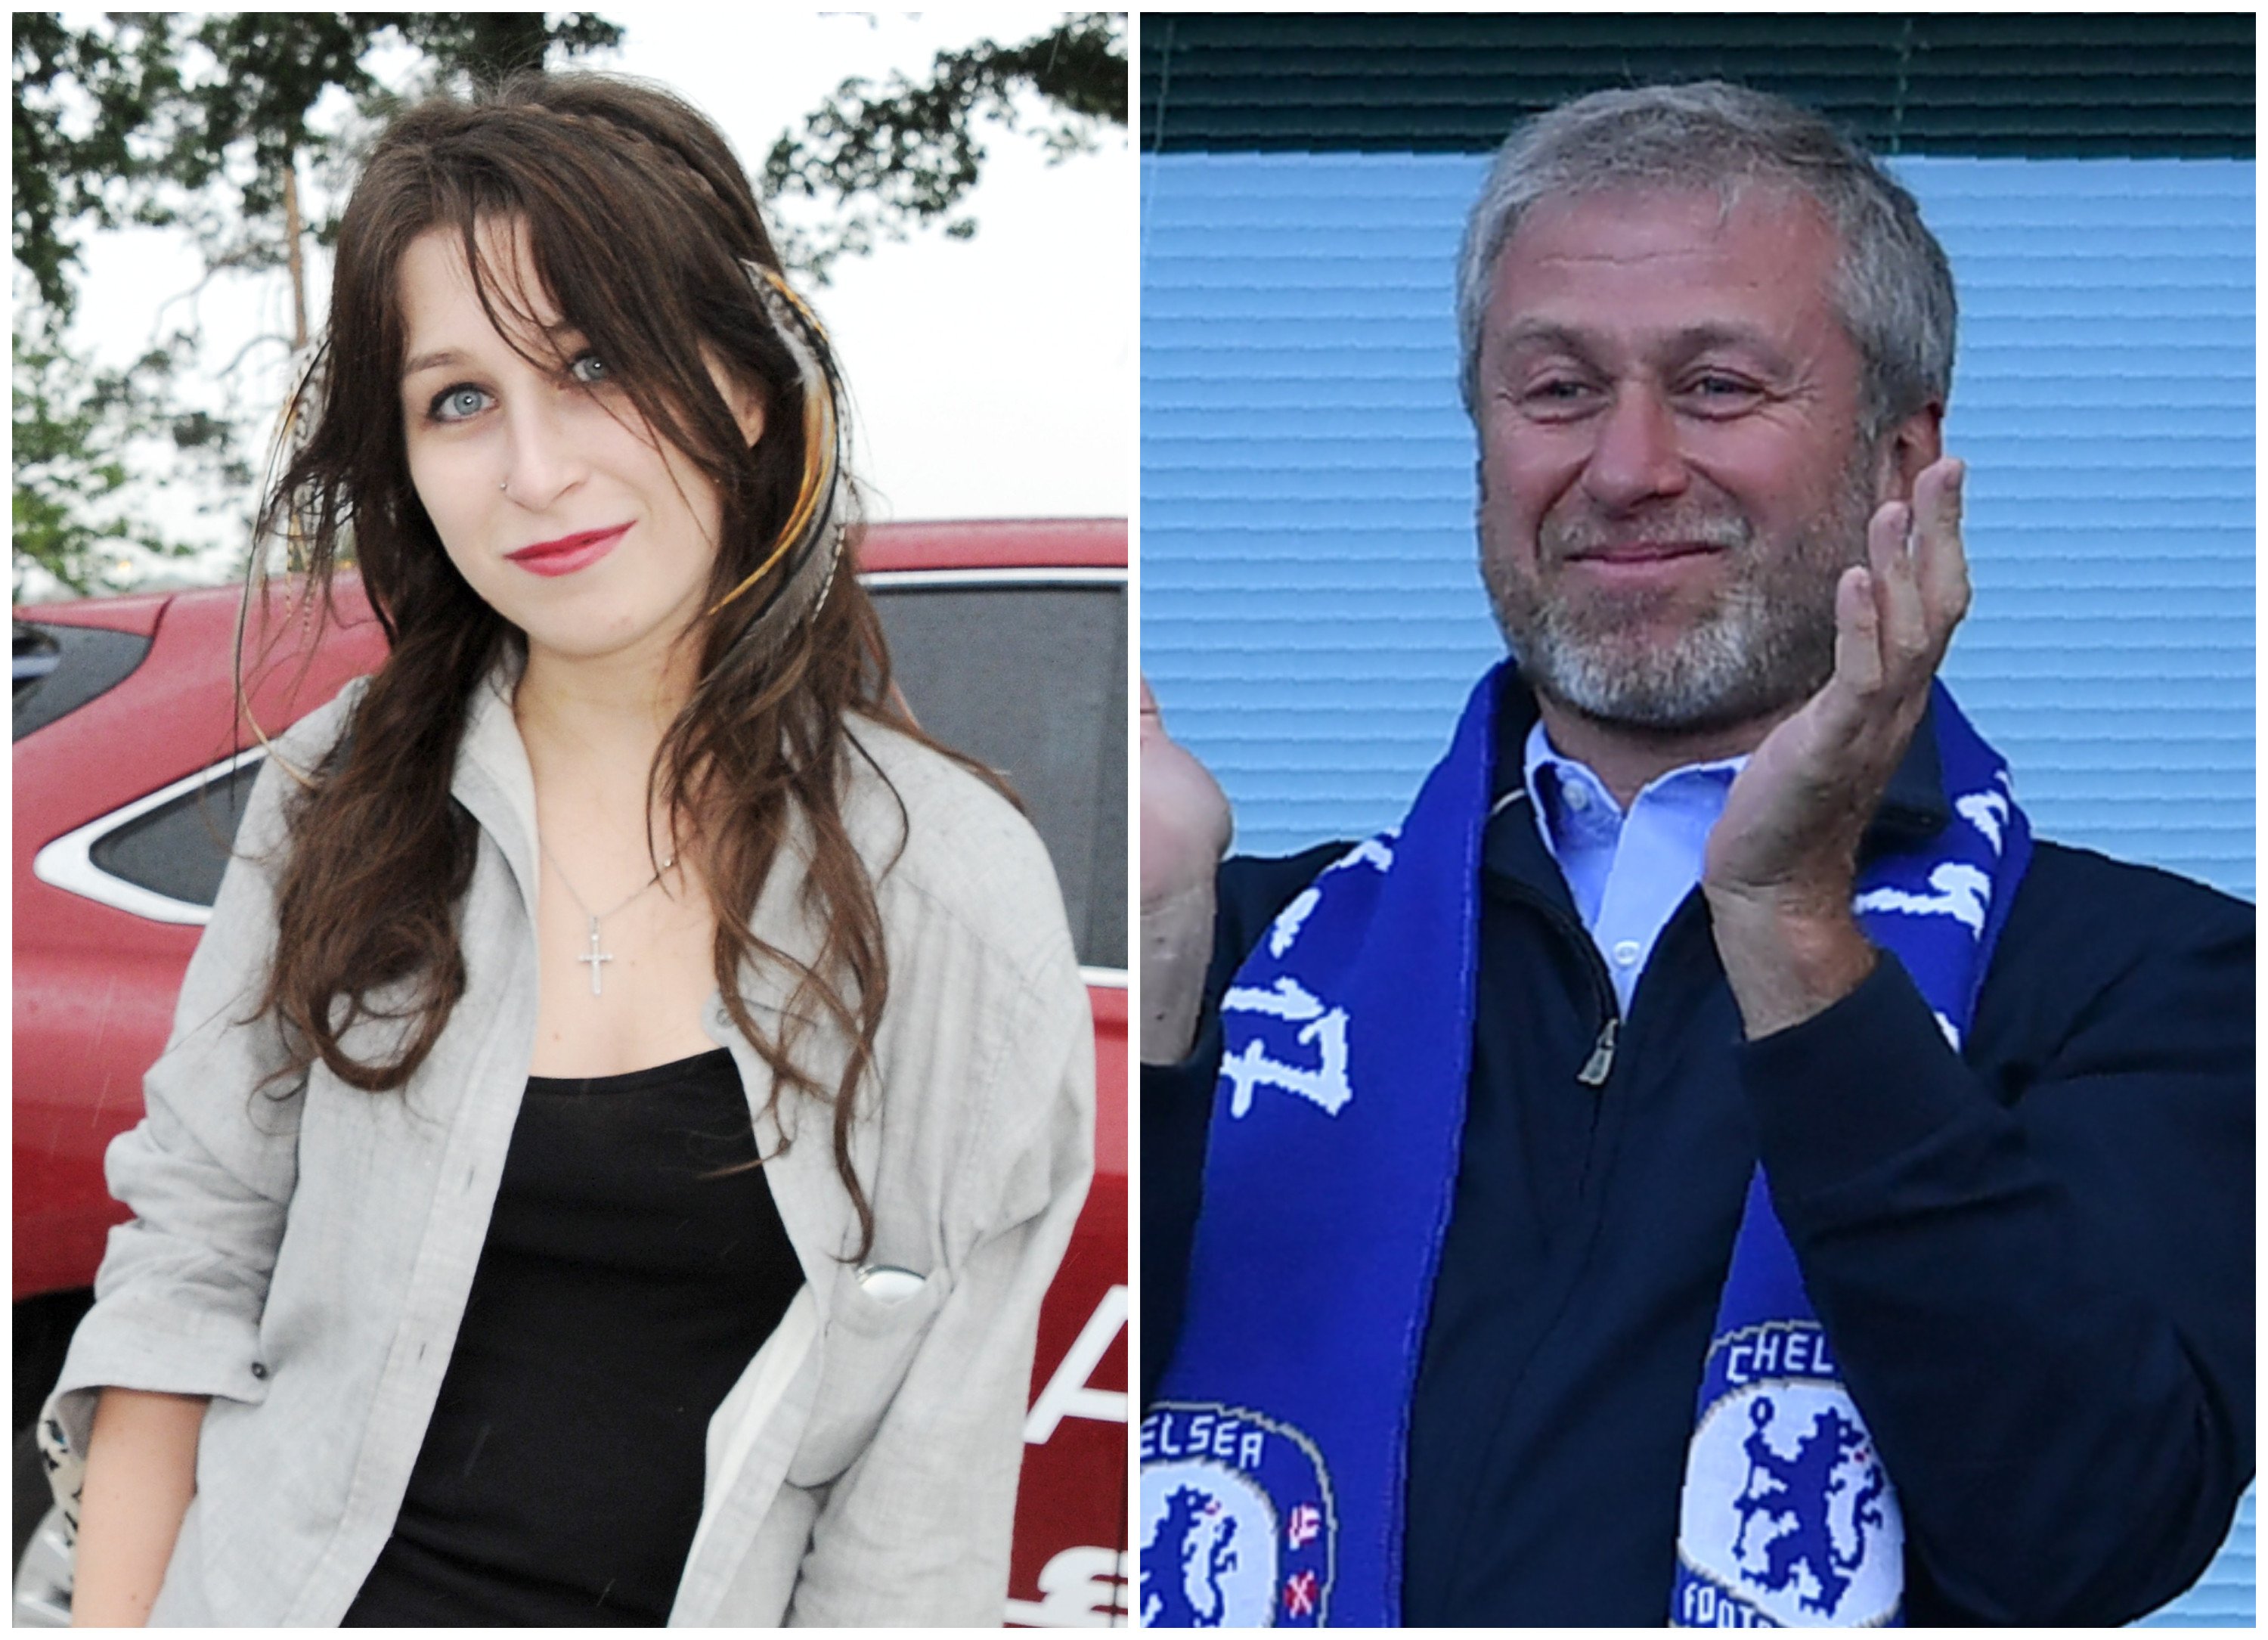 Anna Abramovich is the daughter of Russian oligarch Roman Abramovich. Photos: Getty Images, AFP